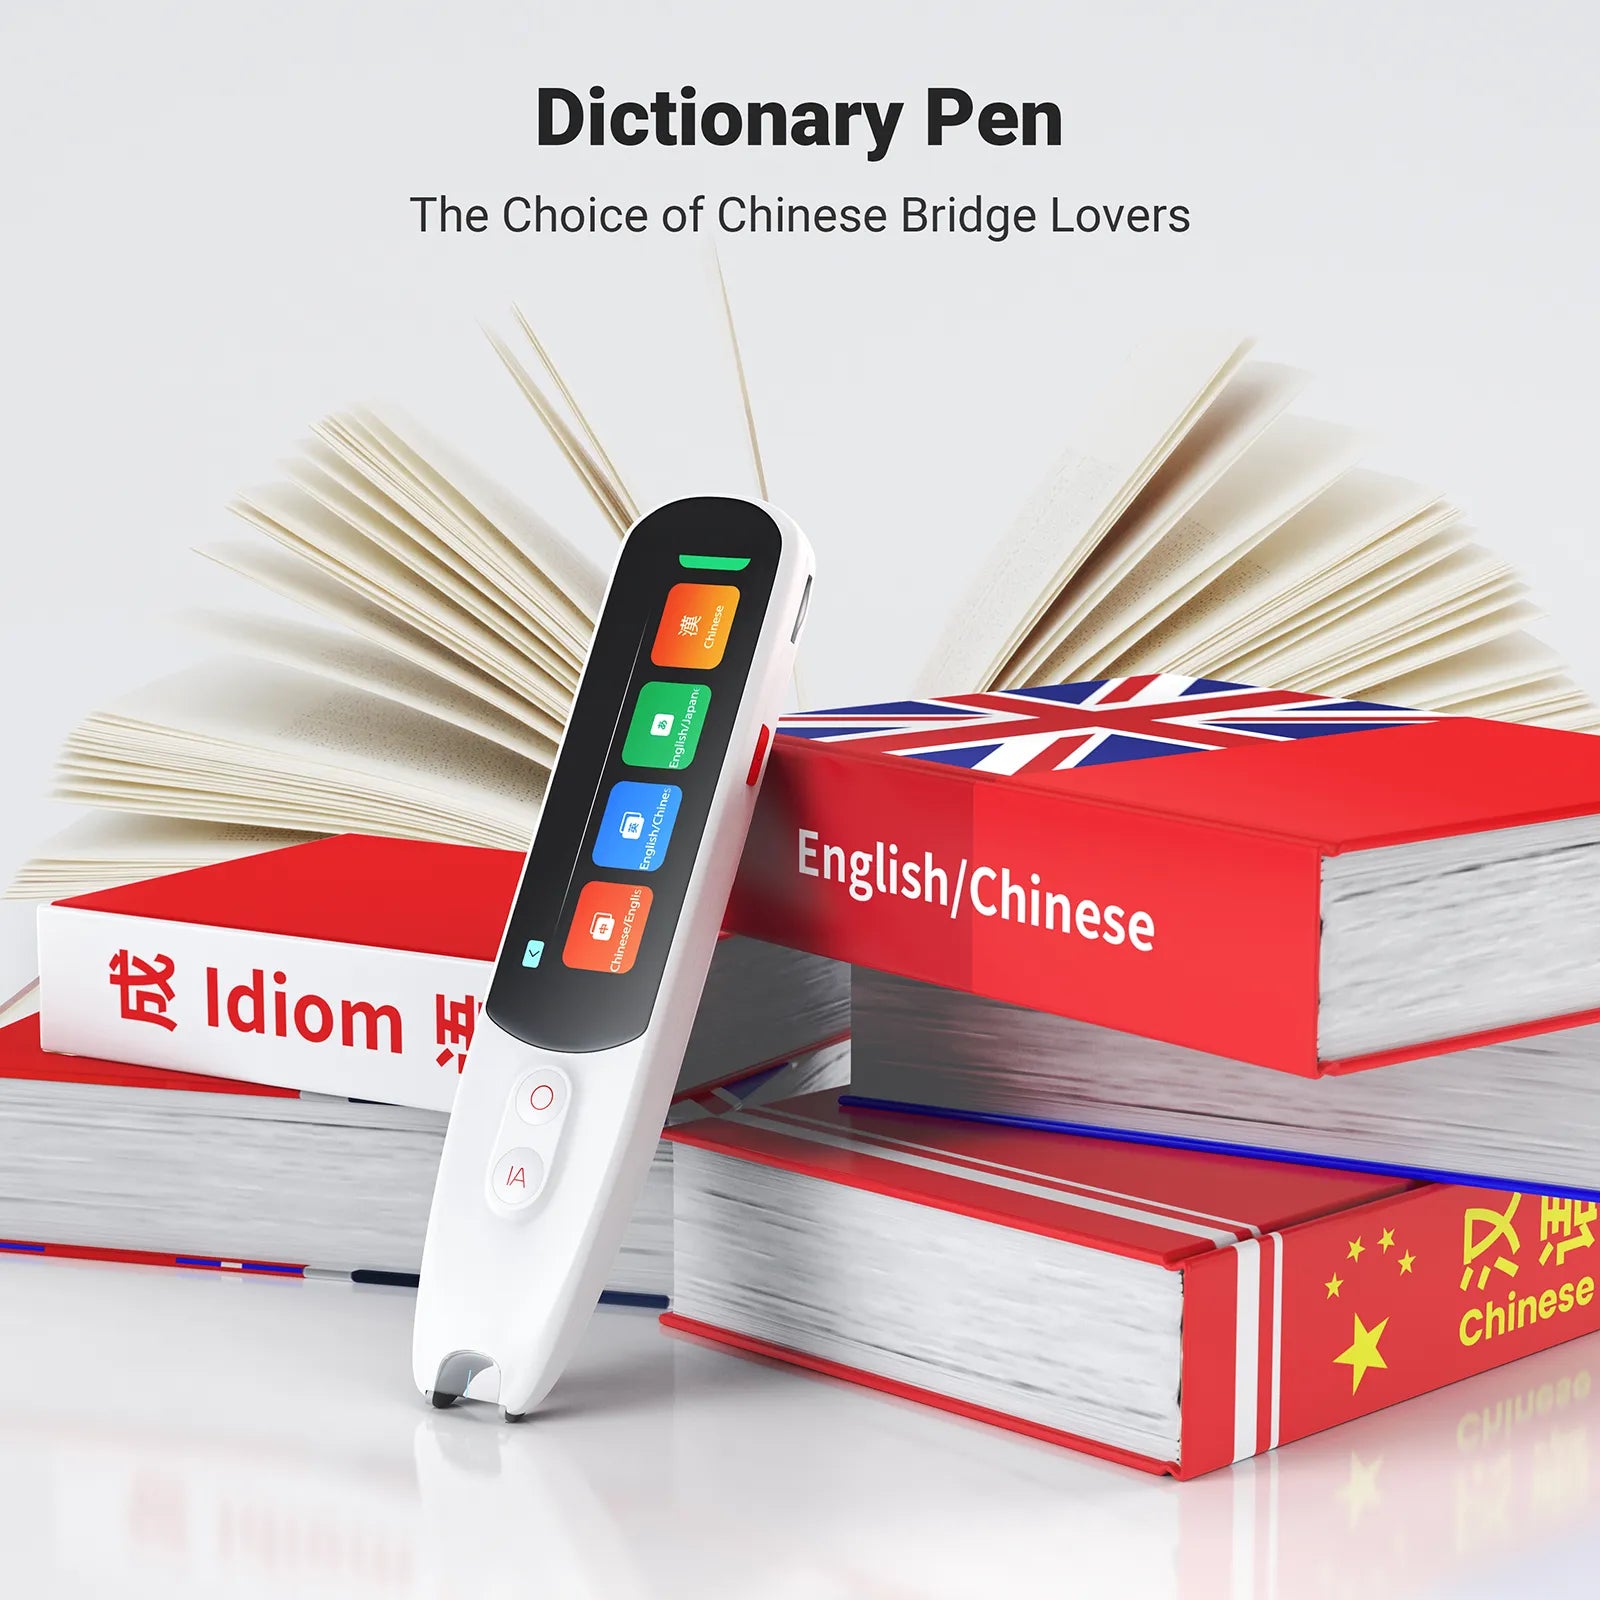 SVANTTO dictionary pen is suitable for people who love bilingual translation.